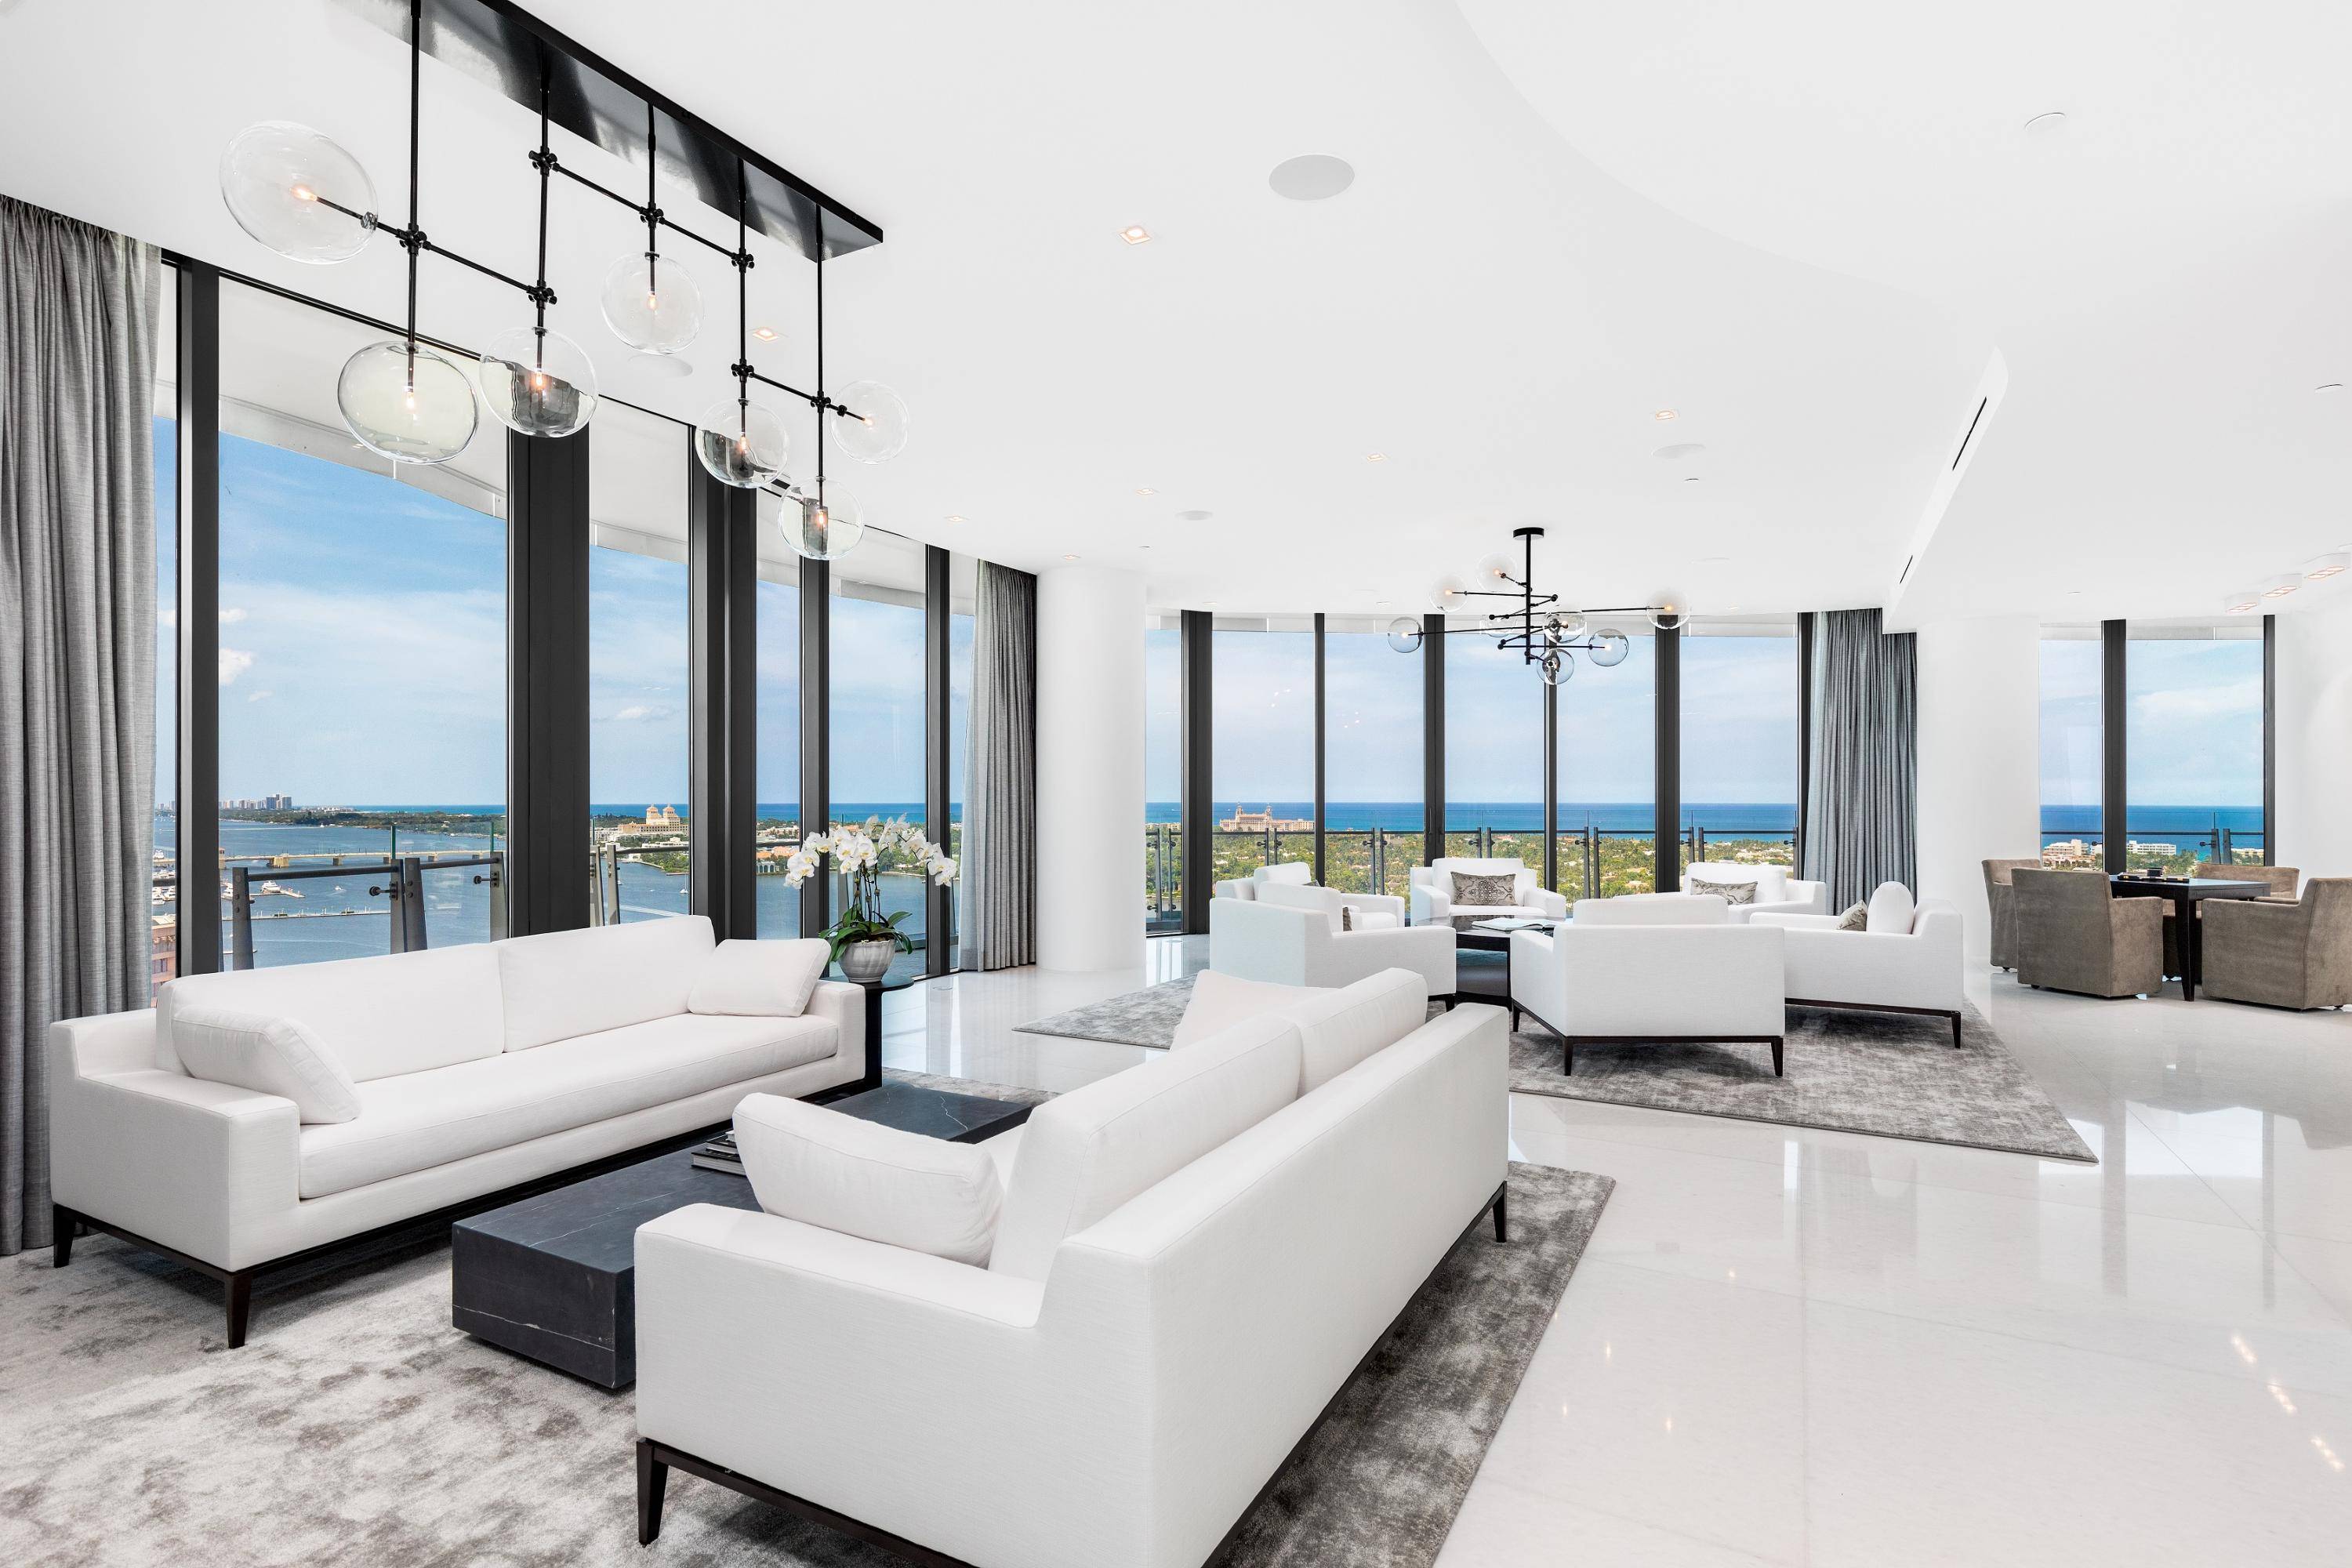 Absolutely the most spectacular condominium available at The Bristol and arguably throughout South Florida.